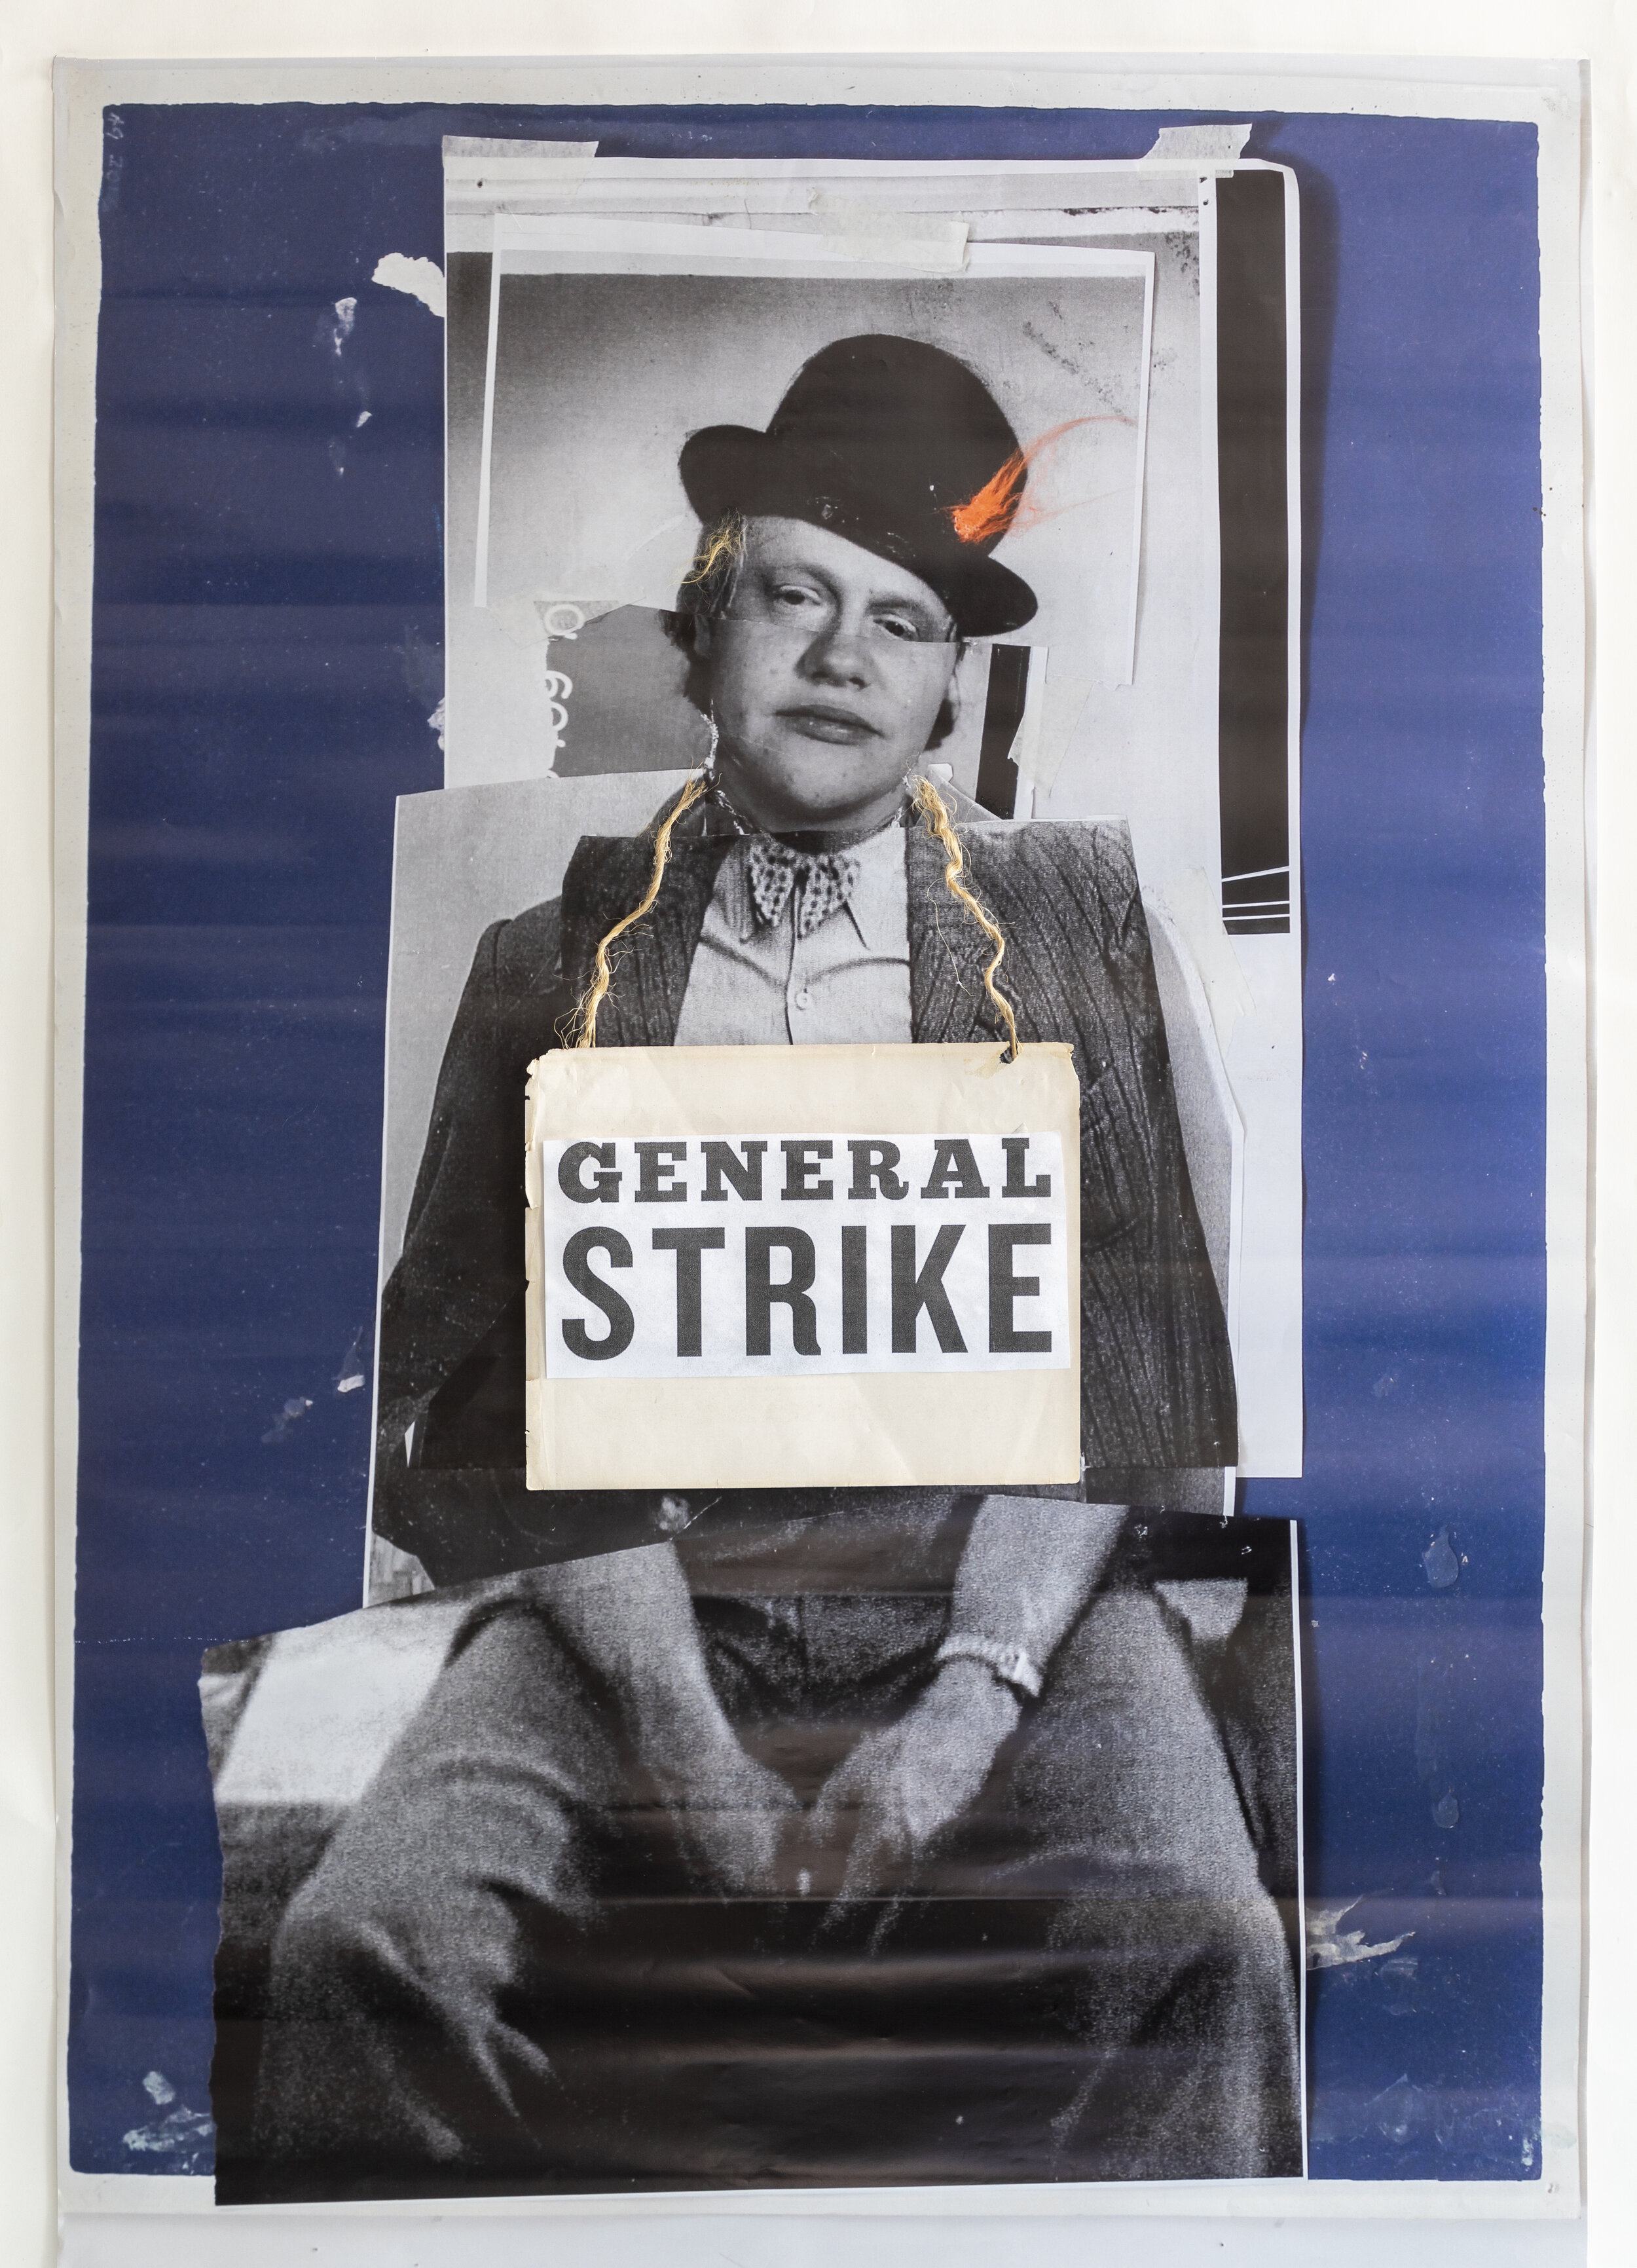 Angela Grossmann, General Strike, 2021, Mixed Media on Paper, 55 x 35.5 inches, Edition of 15, $1500 each. 5-15 available